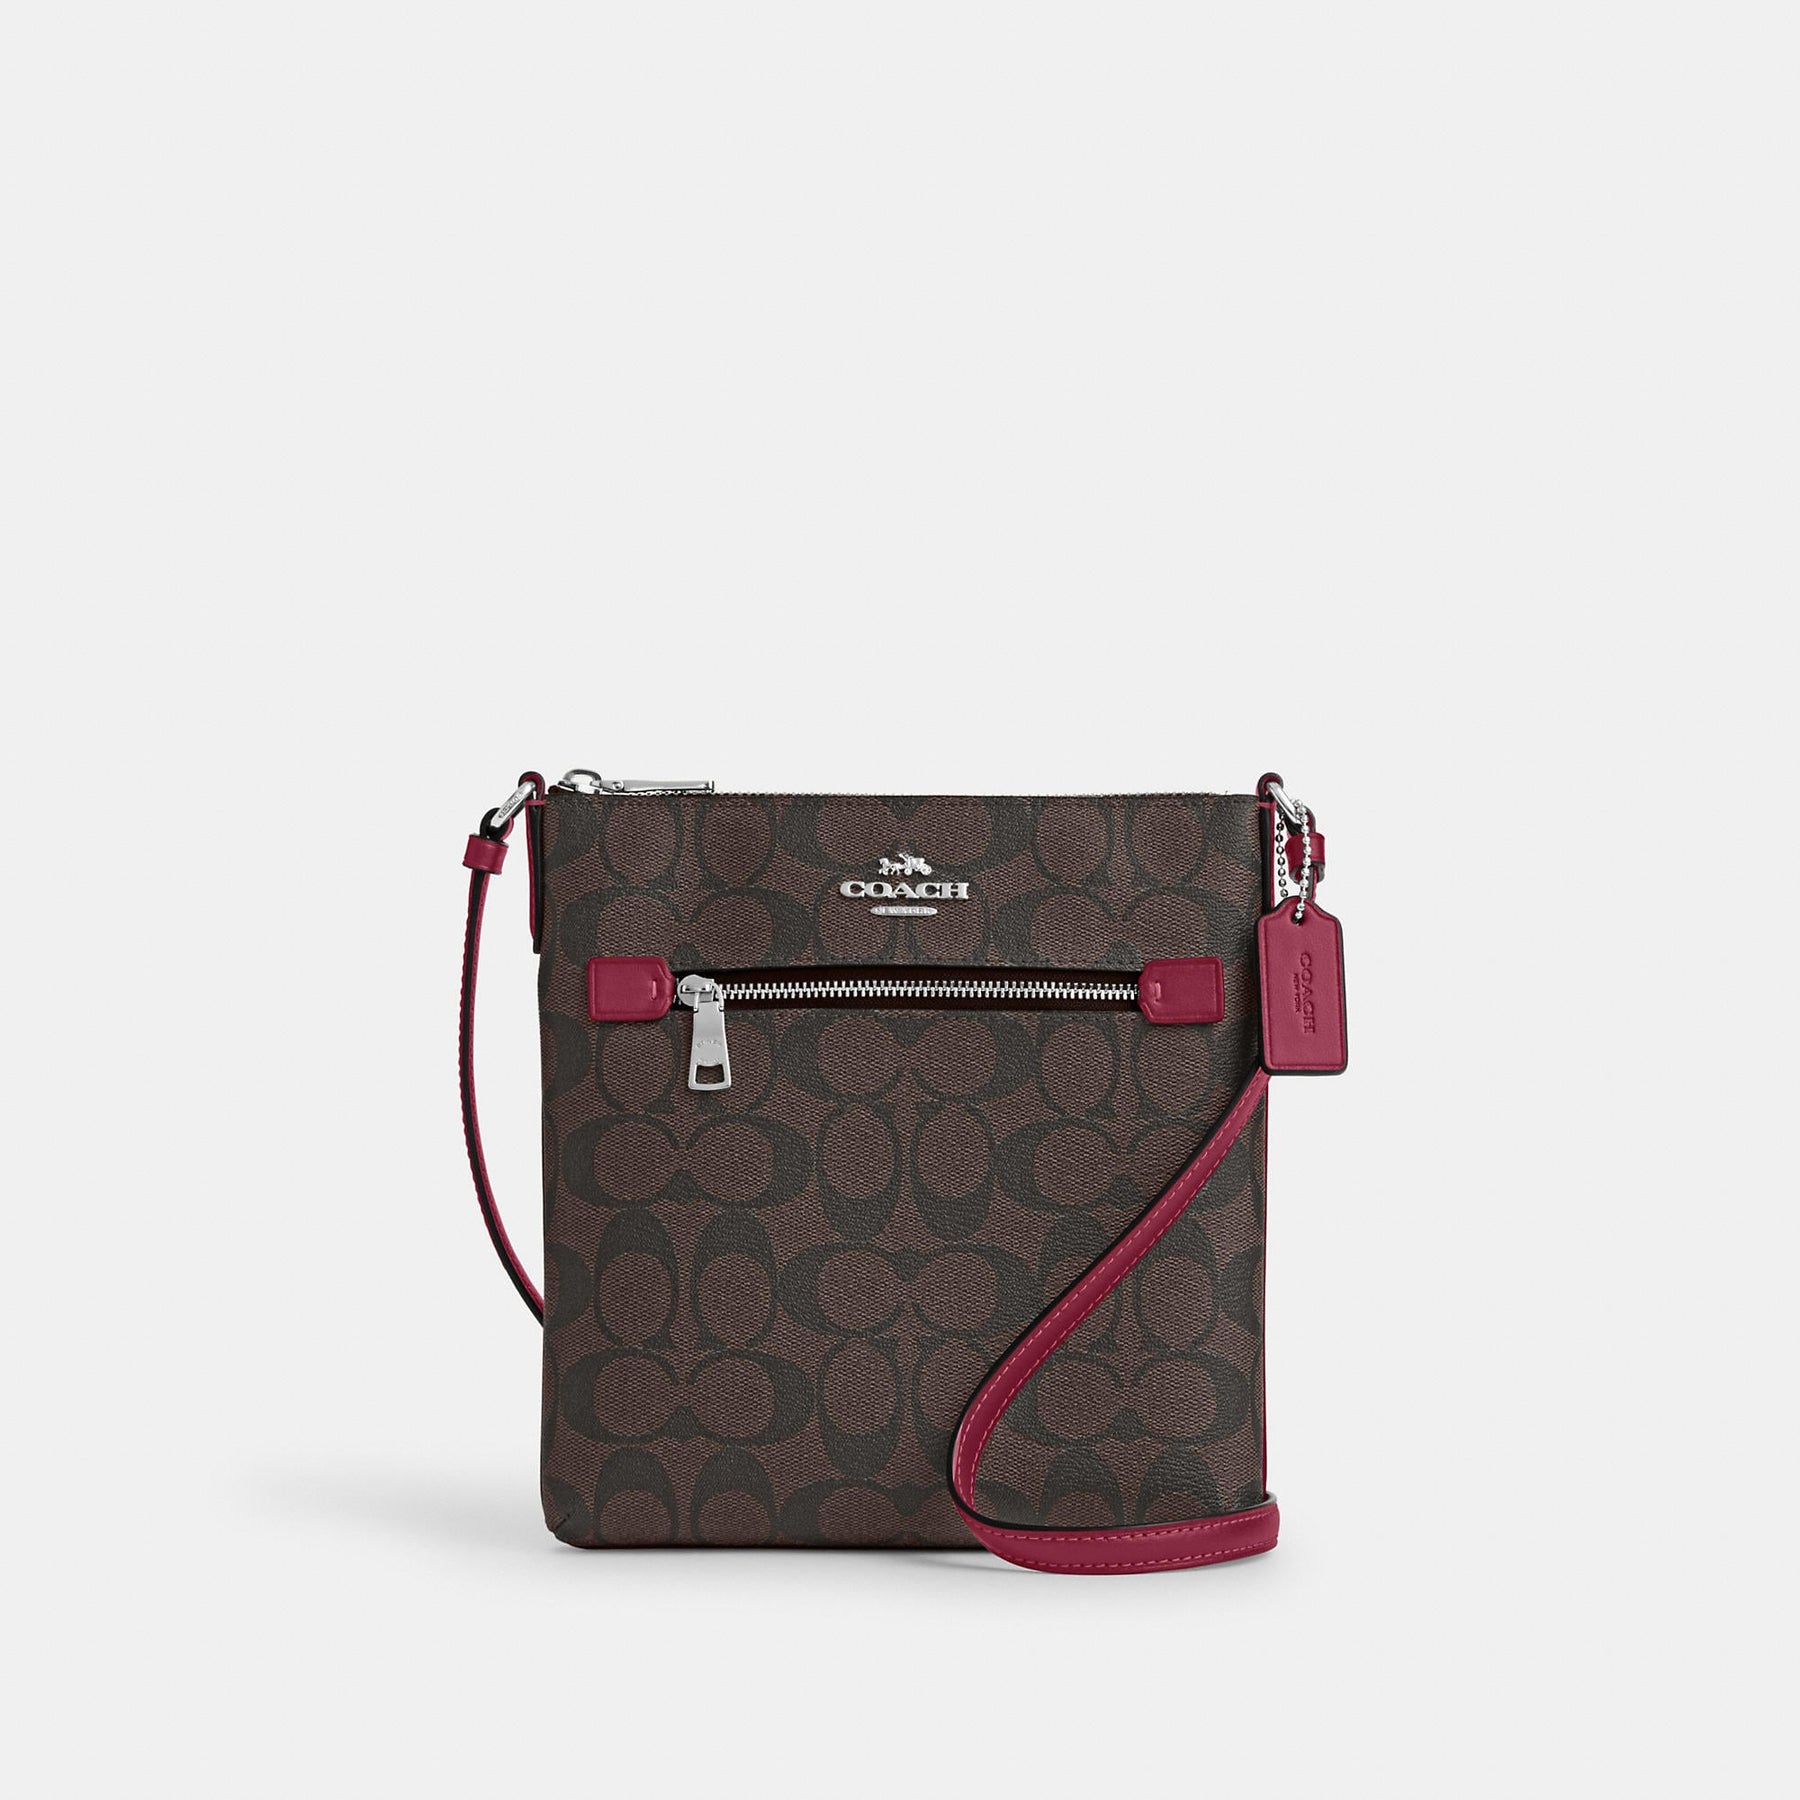 Find Michael Kors Or Coach Bags For Slashed Prices At An